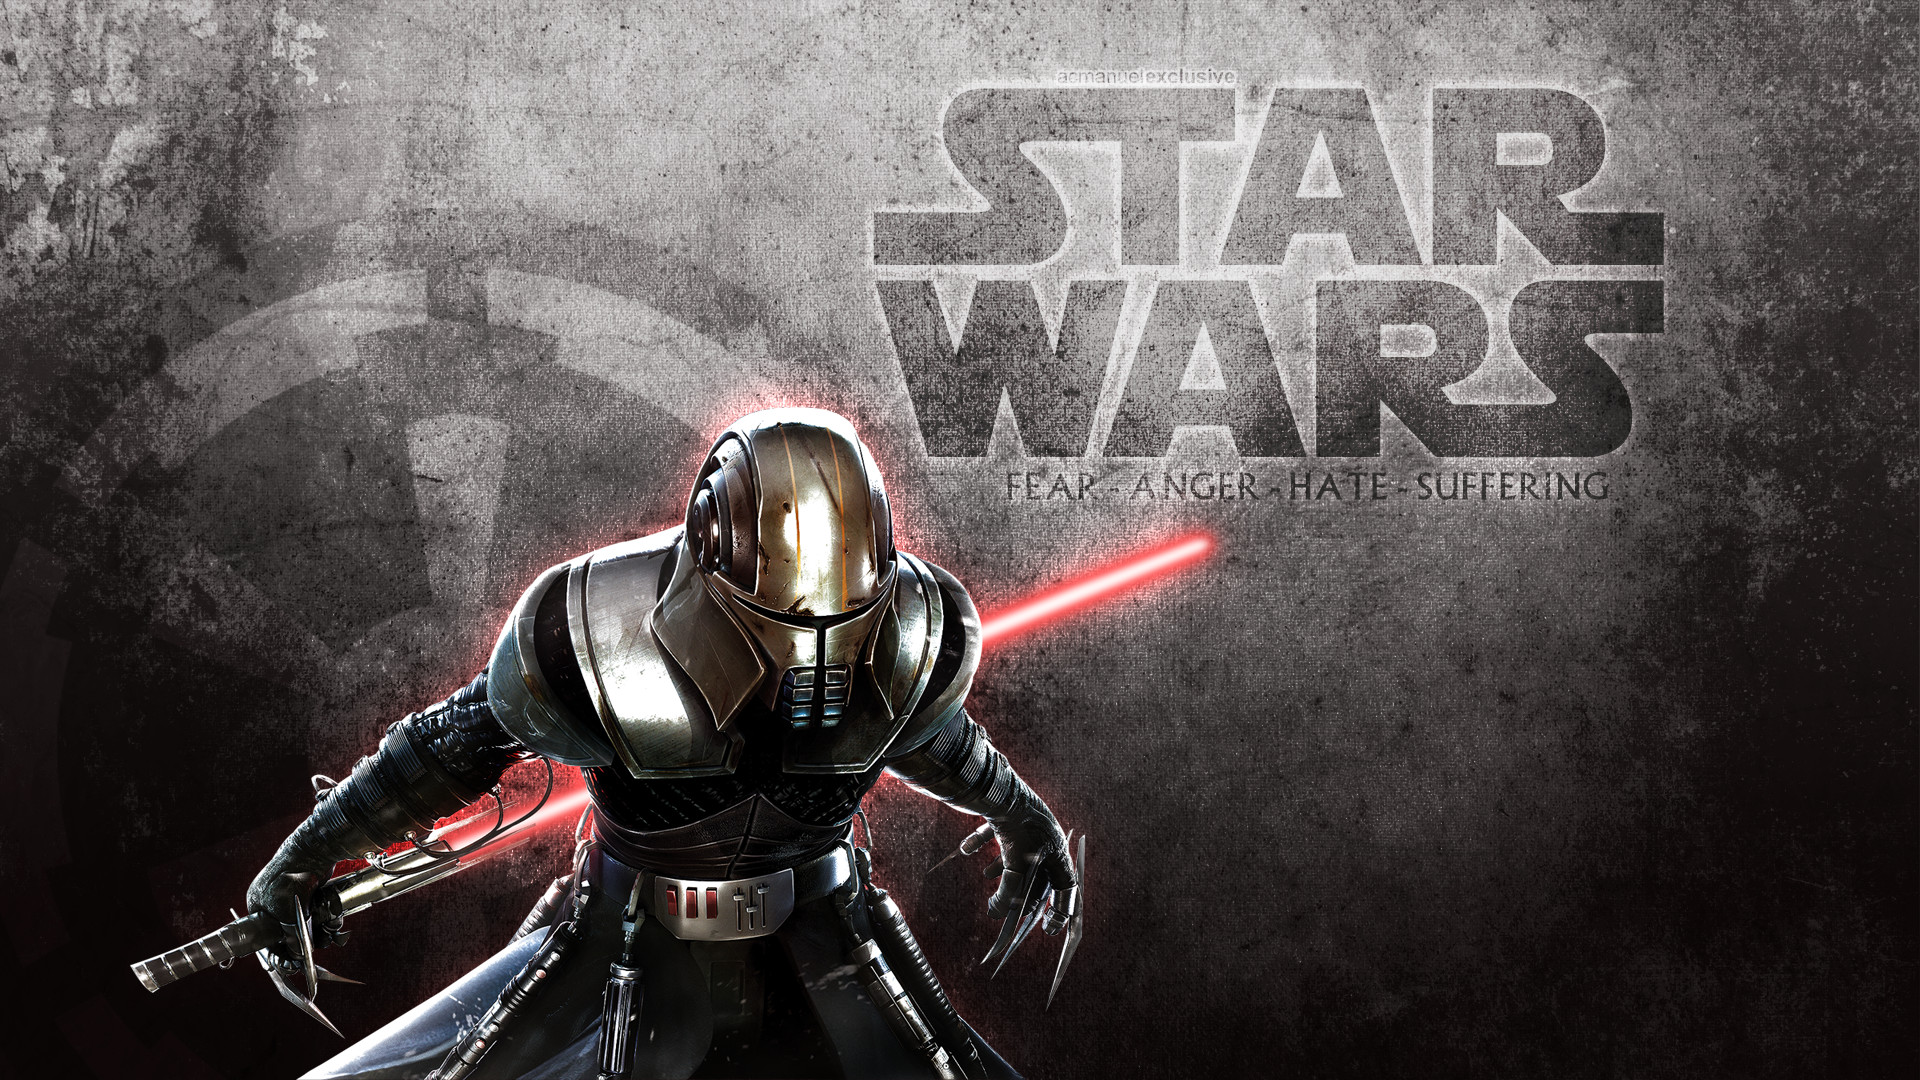 Star Wars Wallpaper Set 10 Awesome Wallpapers